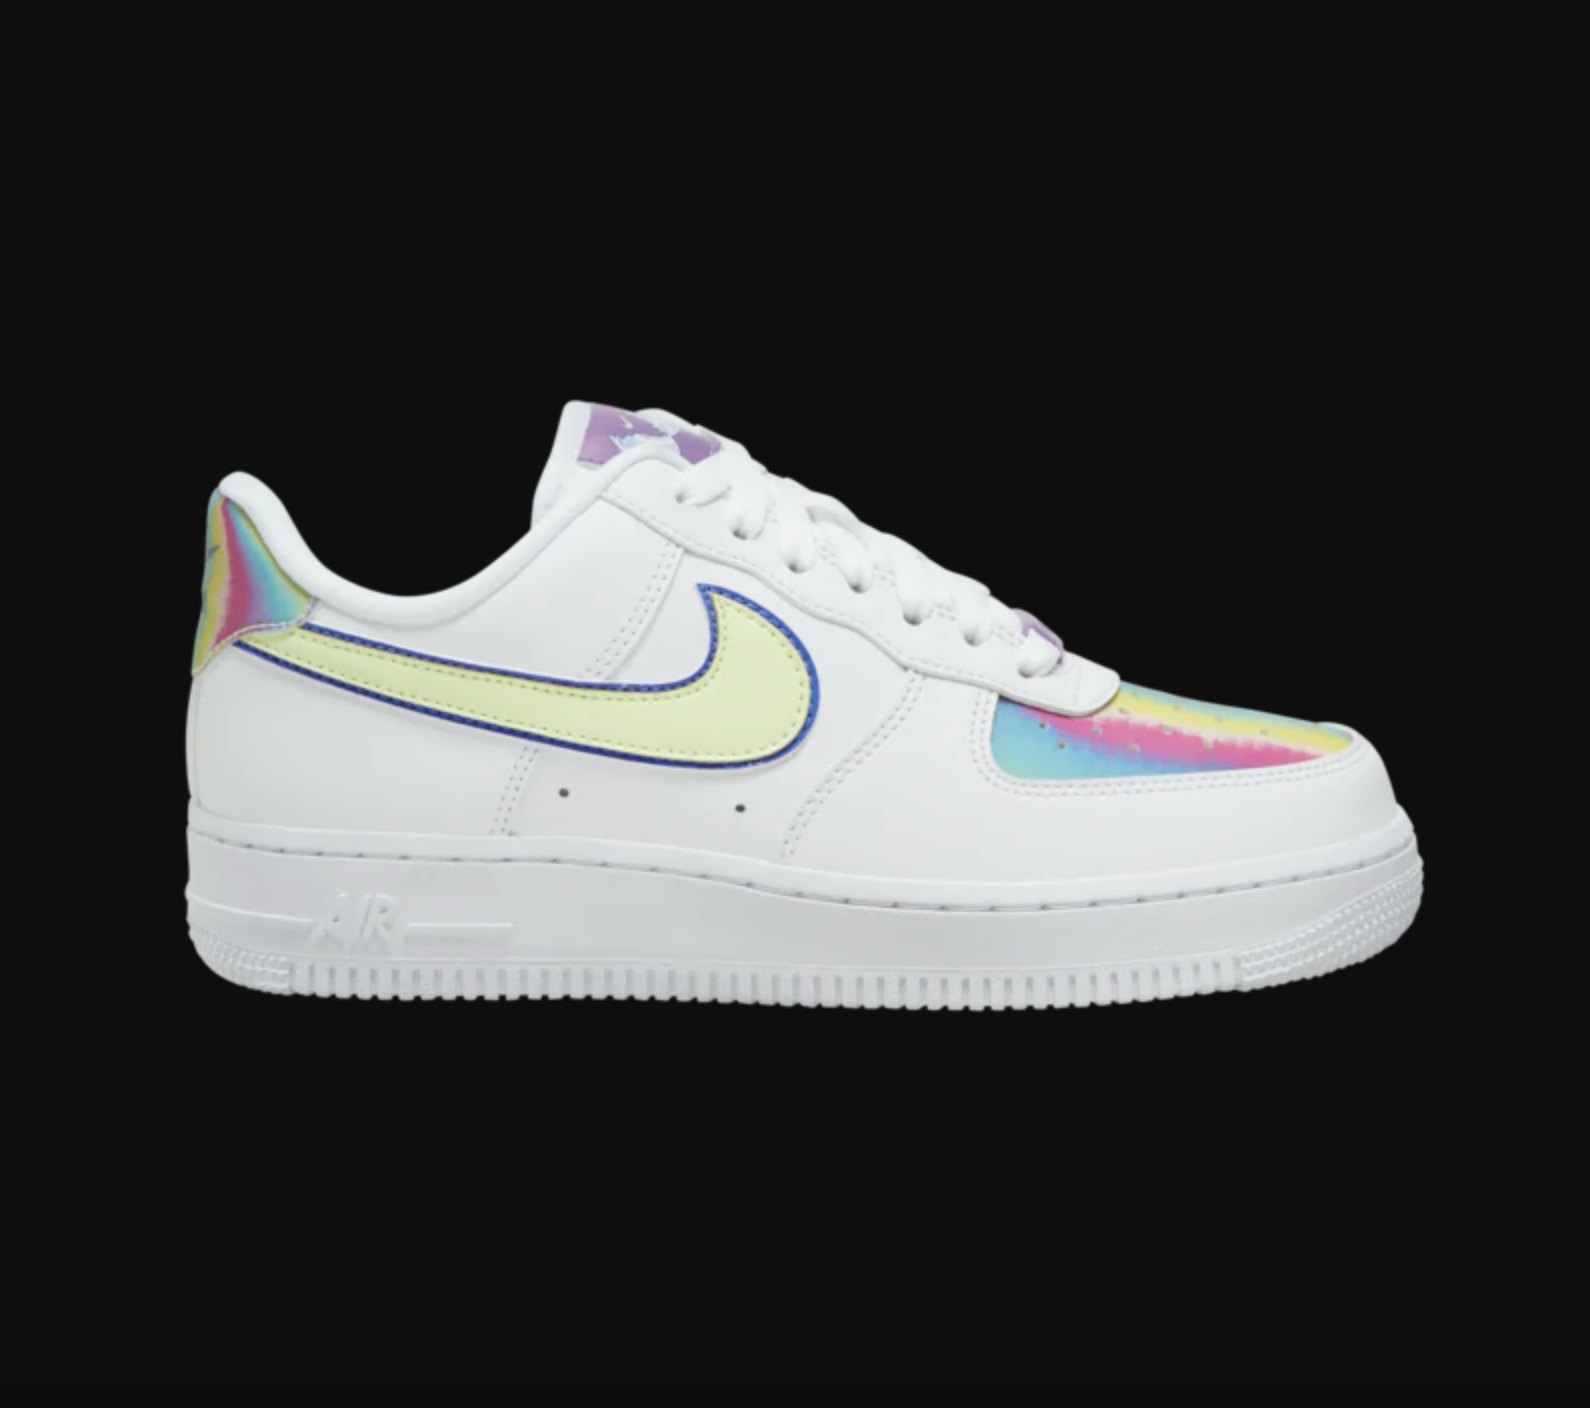 air force one iridescent swoosh